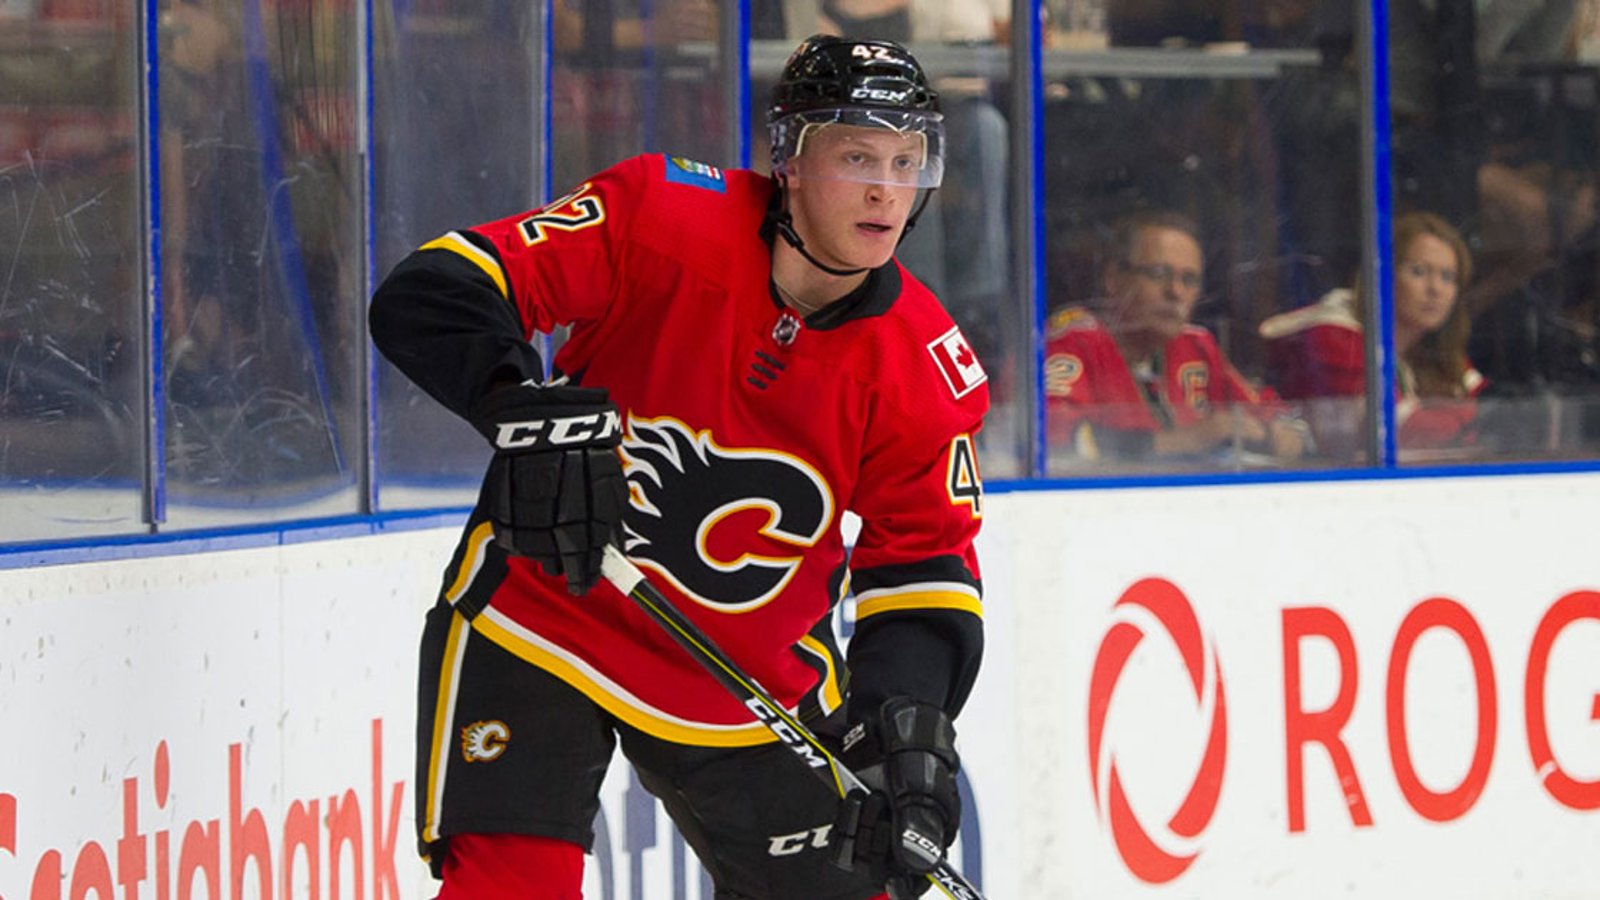 Breaking: Flames' Valimaki could make playoff debut in pivotal Game 4 